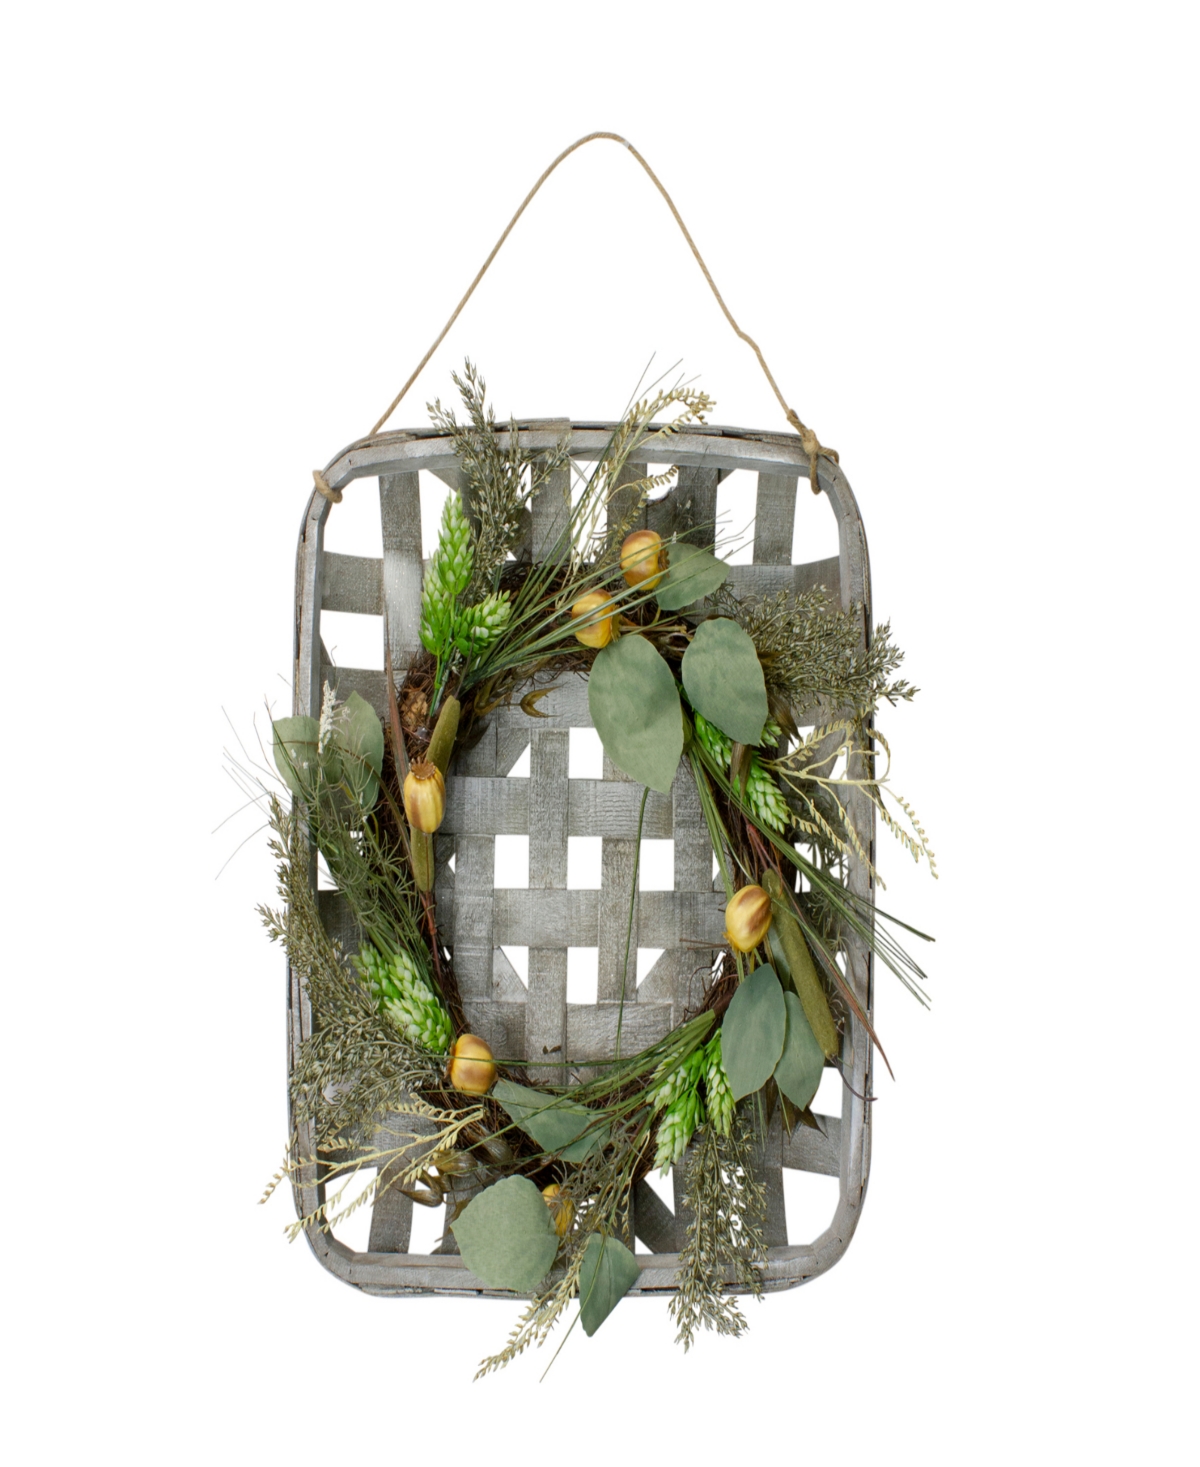 Northlight 16" Autumn Harvest Green Hop And Cattail Grapevine Wreath In A Wooden Tray Hanger